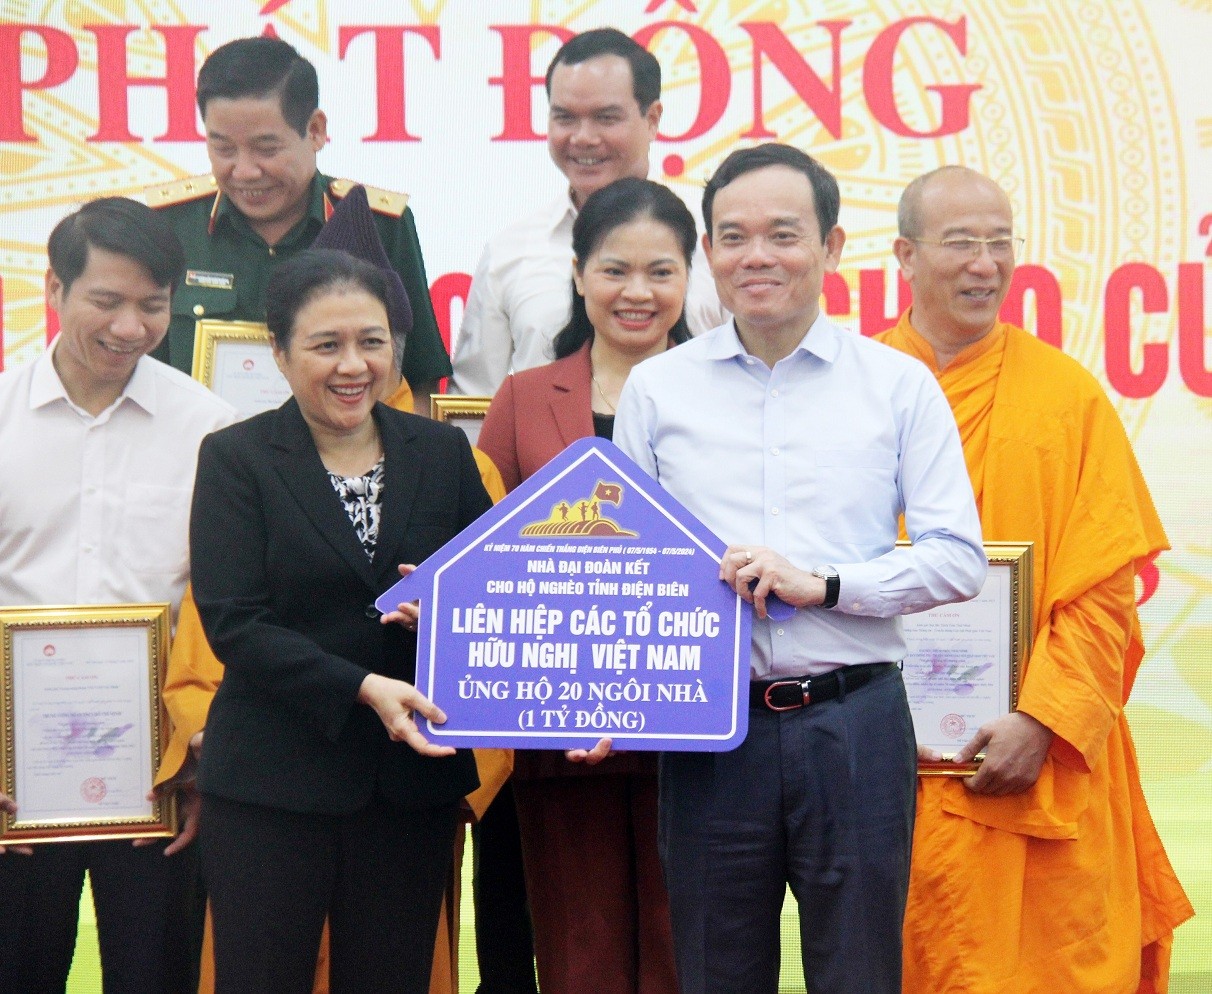 VUFO President Nguyen Phuong Nga hands over VND 1 billion to build 20 houses for poor households in Dien Bien province. Photo: Thanh Luan